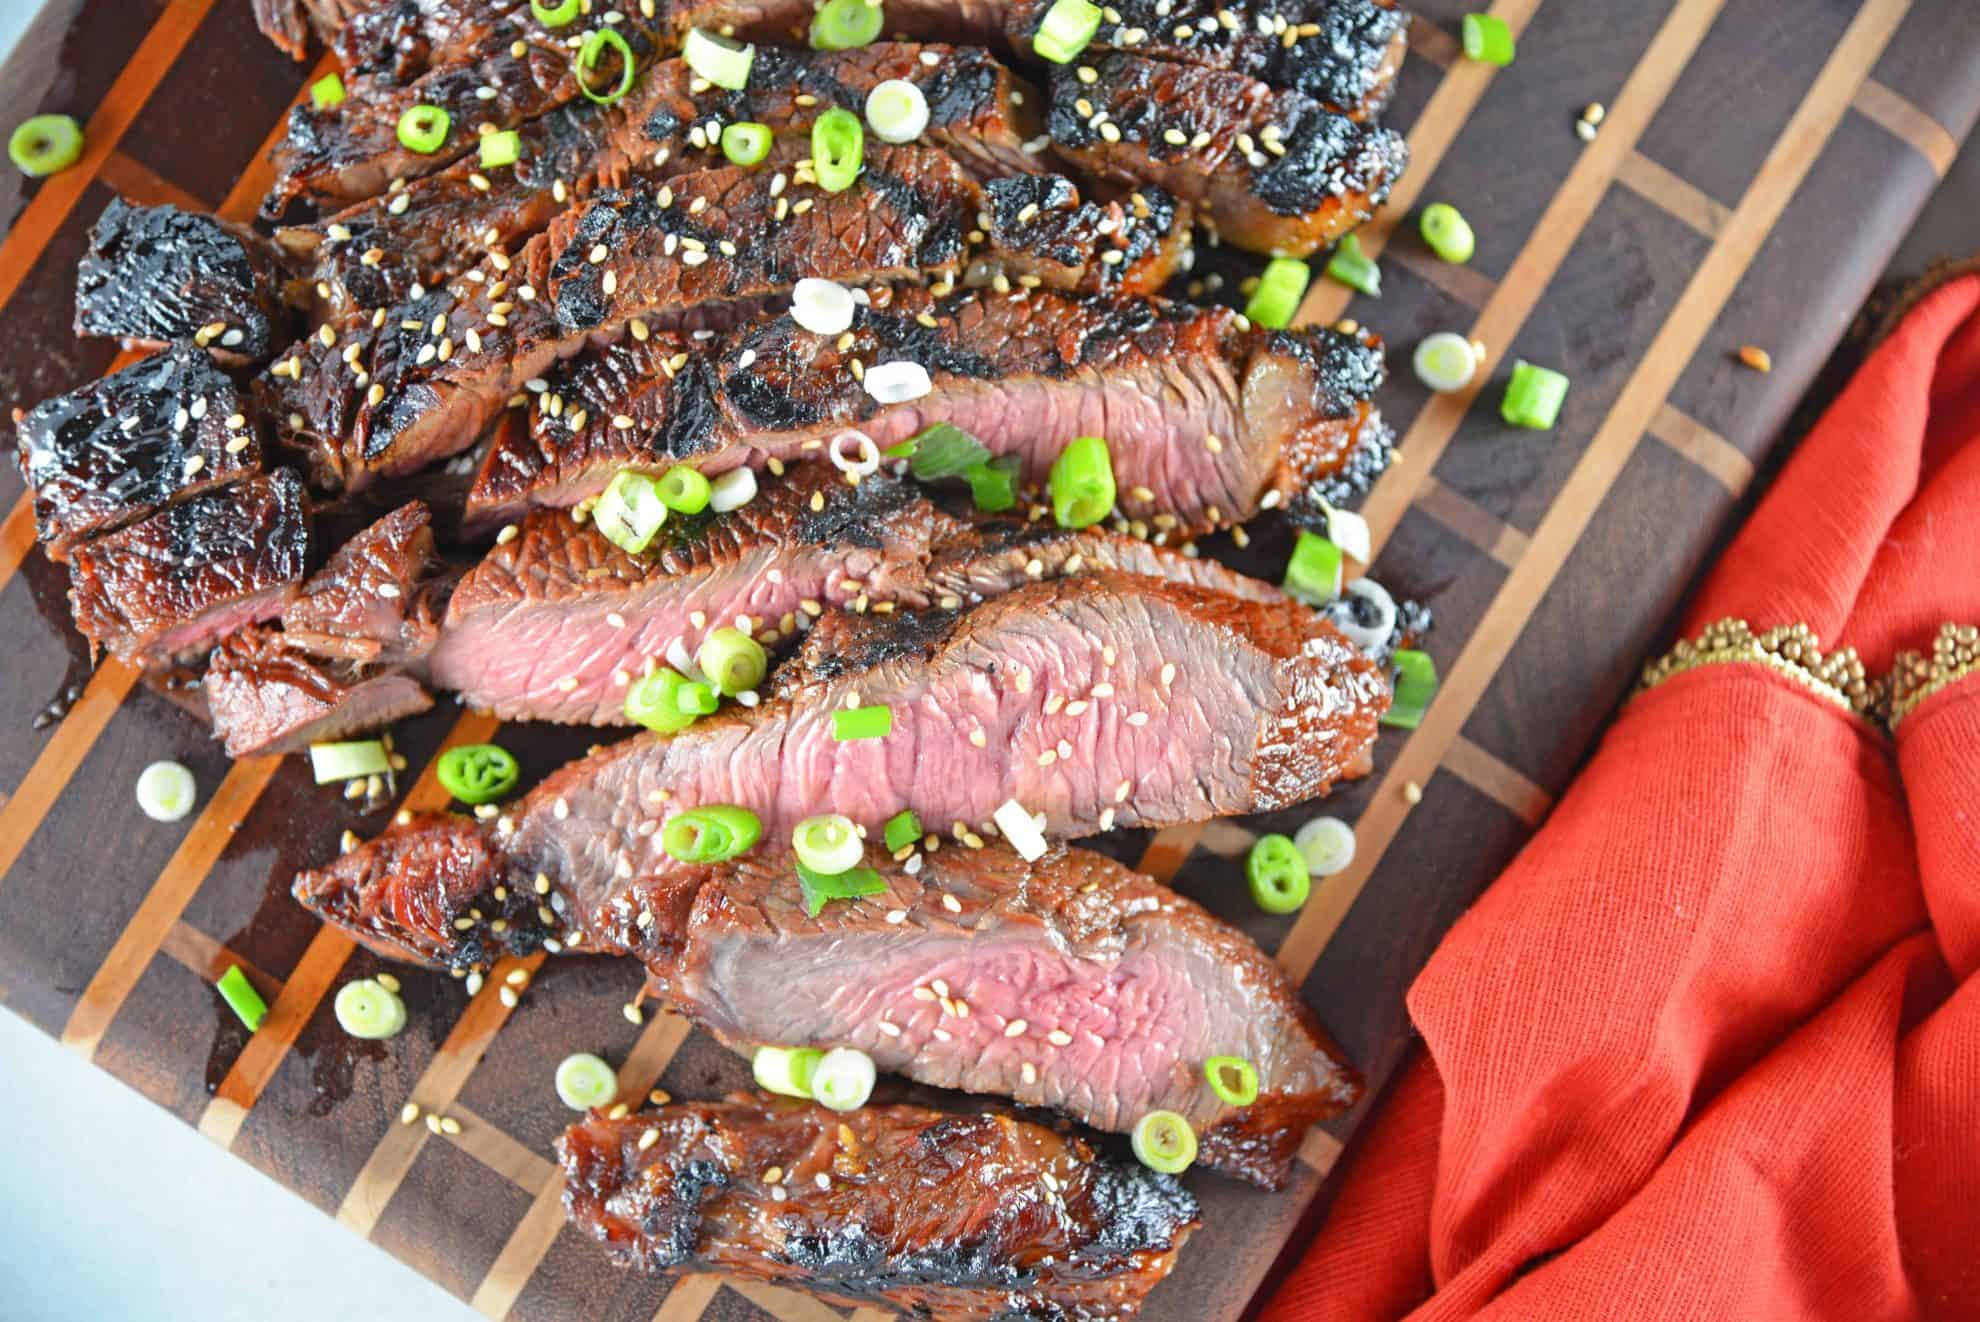 Asian BBQ Steak marinade can be used on any cut of beef, combining traditional Asian flavors like soy sauce, honey, ginger, sesame and garlic. #steakmarinade #bbqsteak #beefrecipe www.savoryexperiments.com 